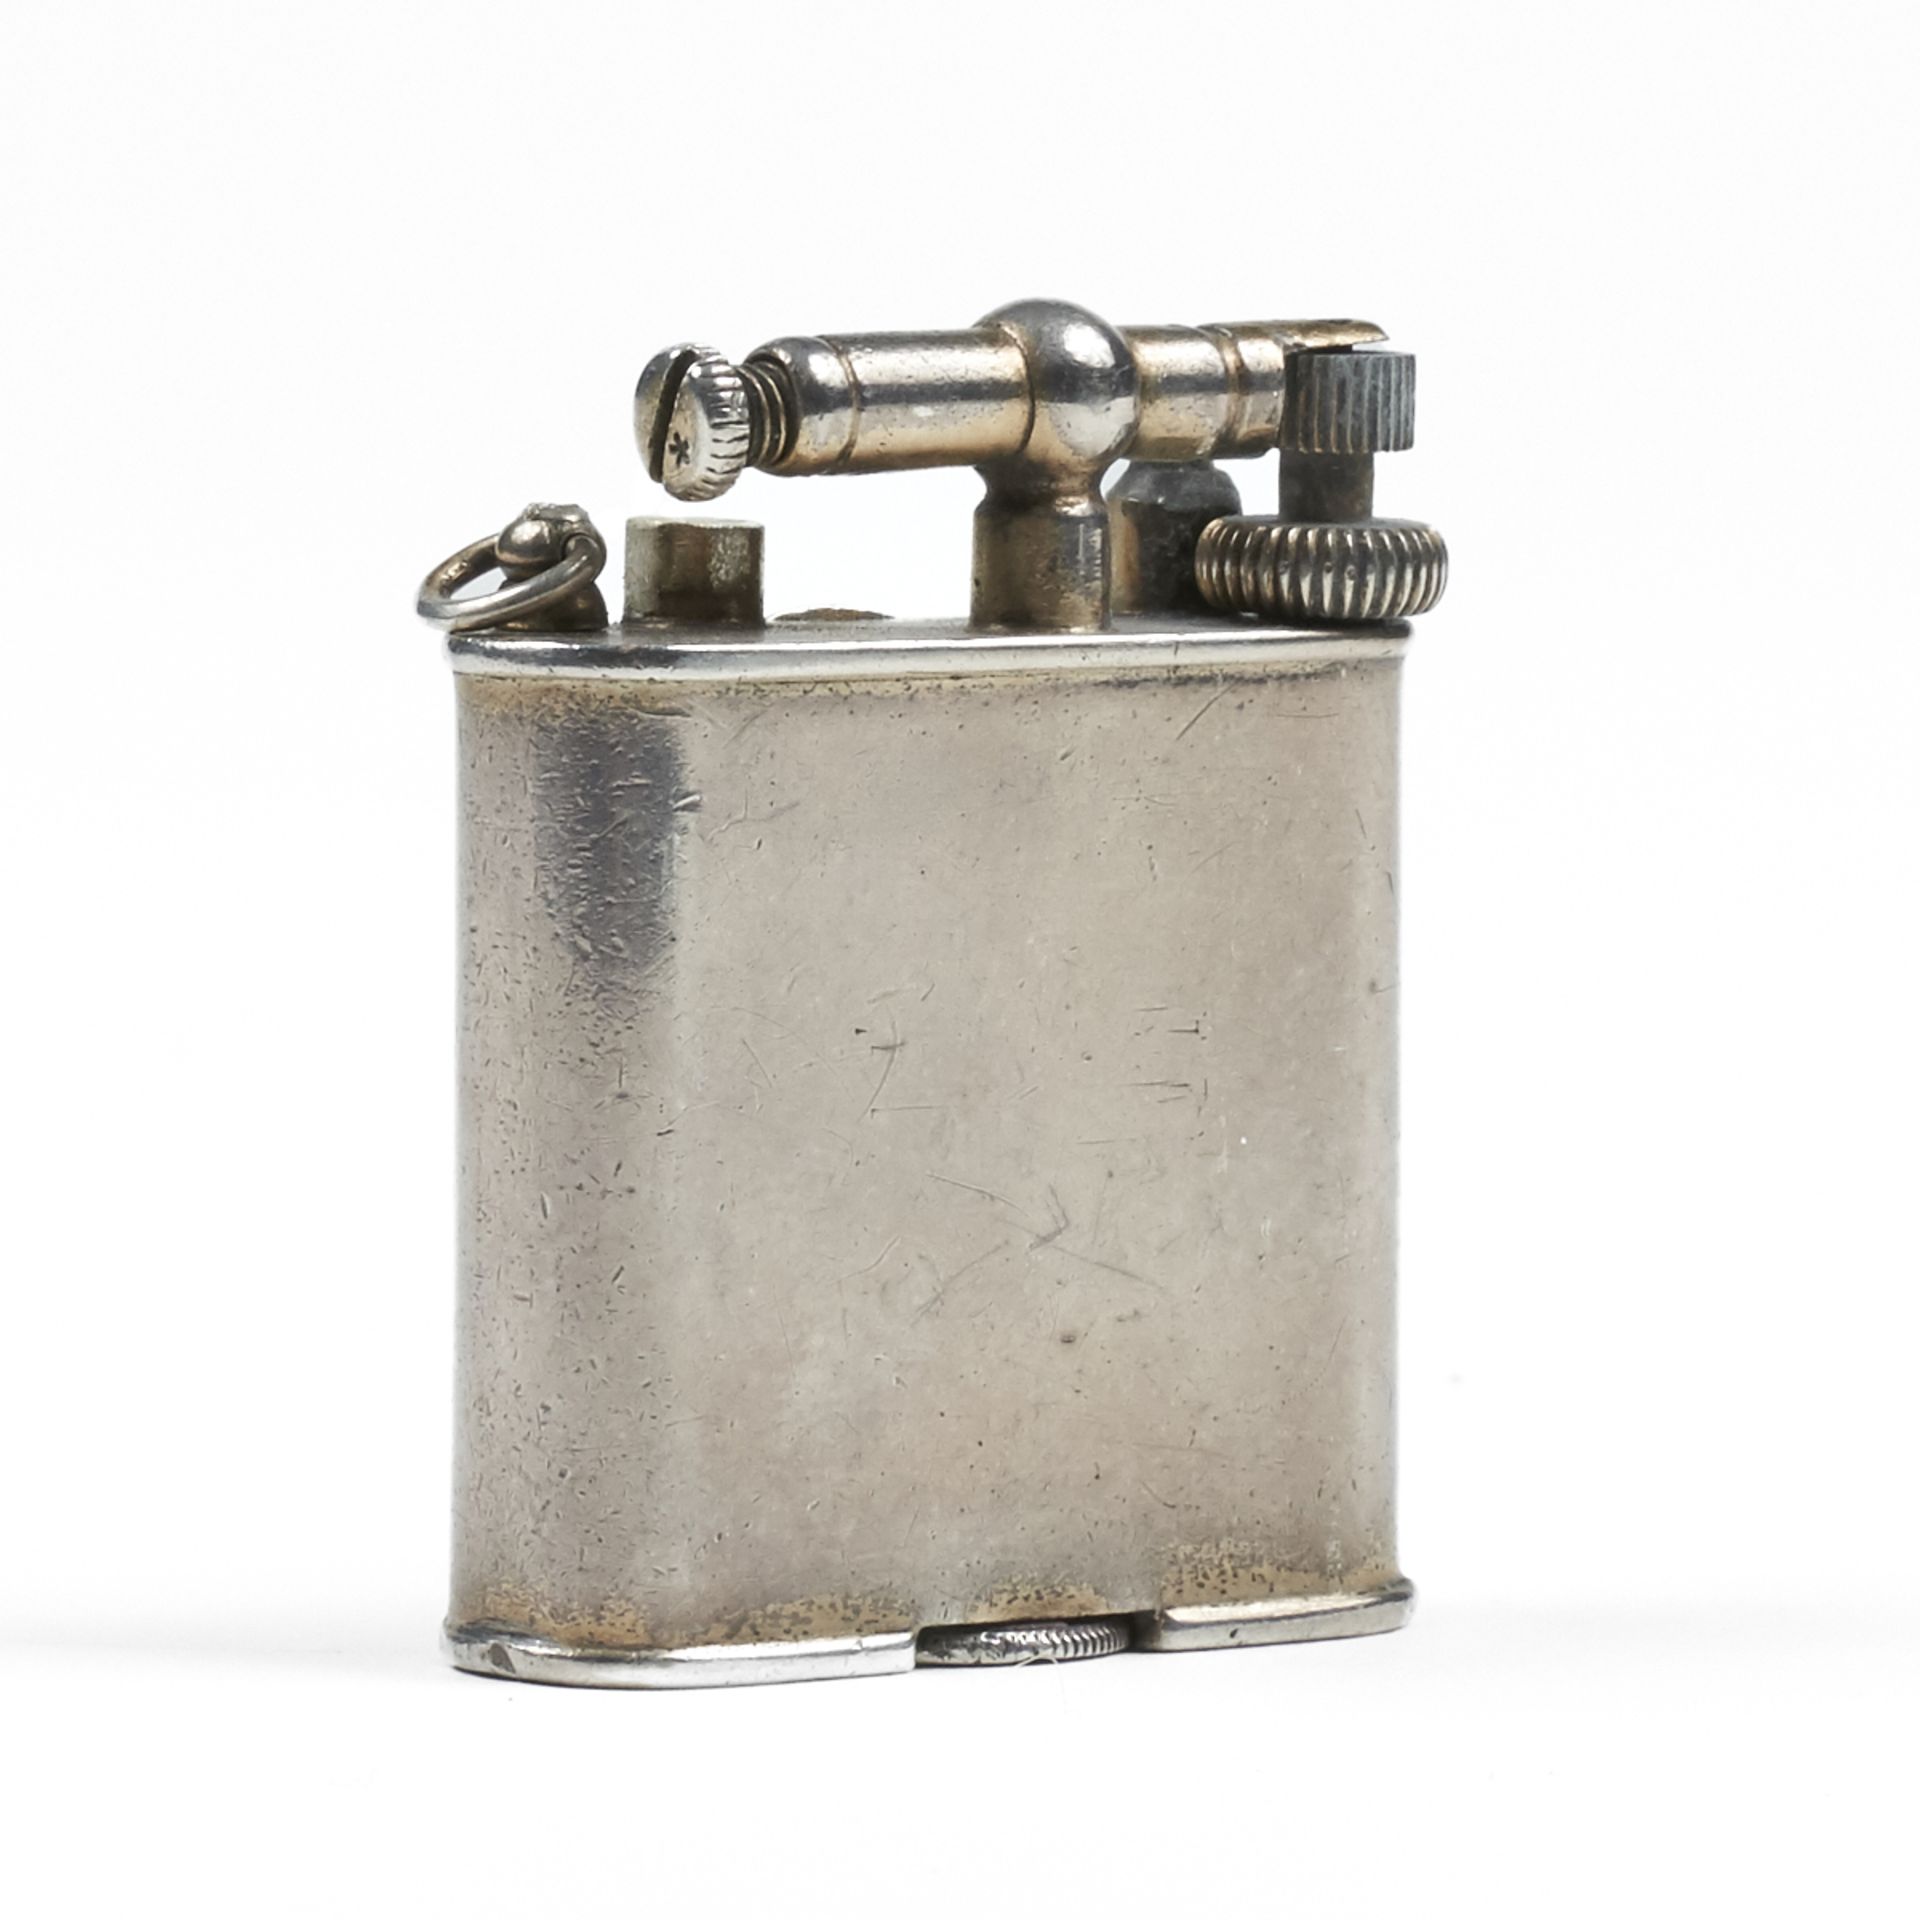 Dunhill Swing Arm Watch and Petrol Sterling Lighter - Image 3 of 9